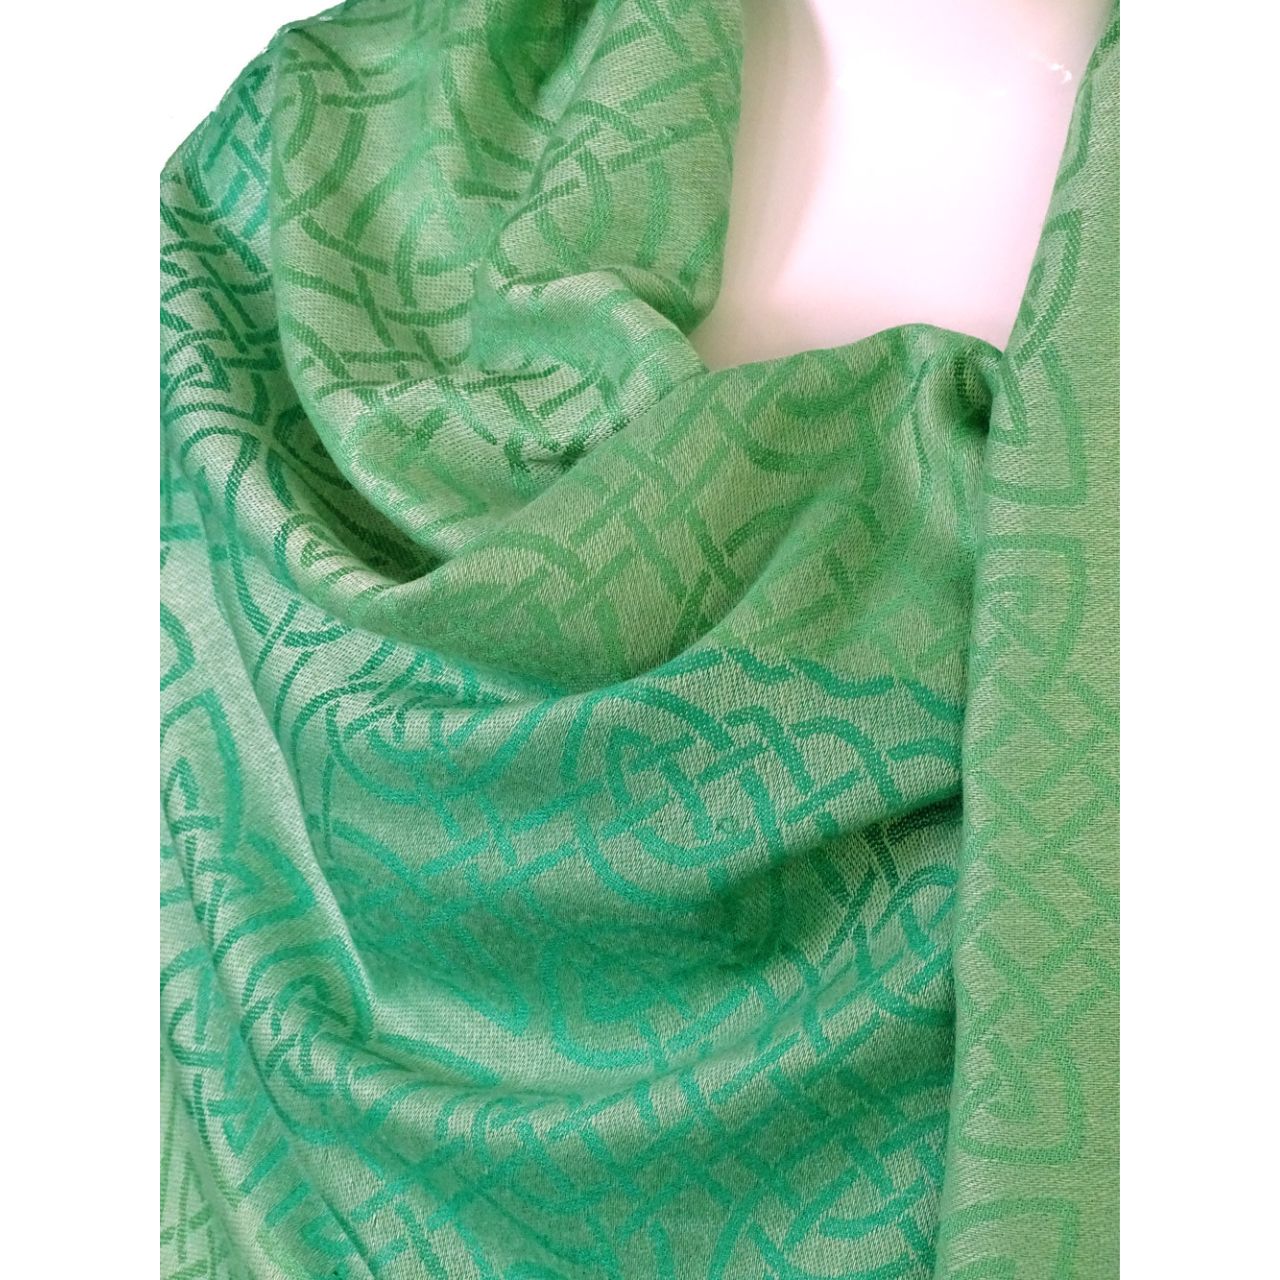 Mulligans Ireland Innisfree Celtic Pashmina Shawl  Named after the islands of Ireland, and inspired by their stories and history, our Island Range of shawls and scarves is a fusion of modern Irish design and colour palette together with the traditional Celtic knot weave or ‘snaidhm celtic’ in Irish/Gaelic.